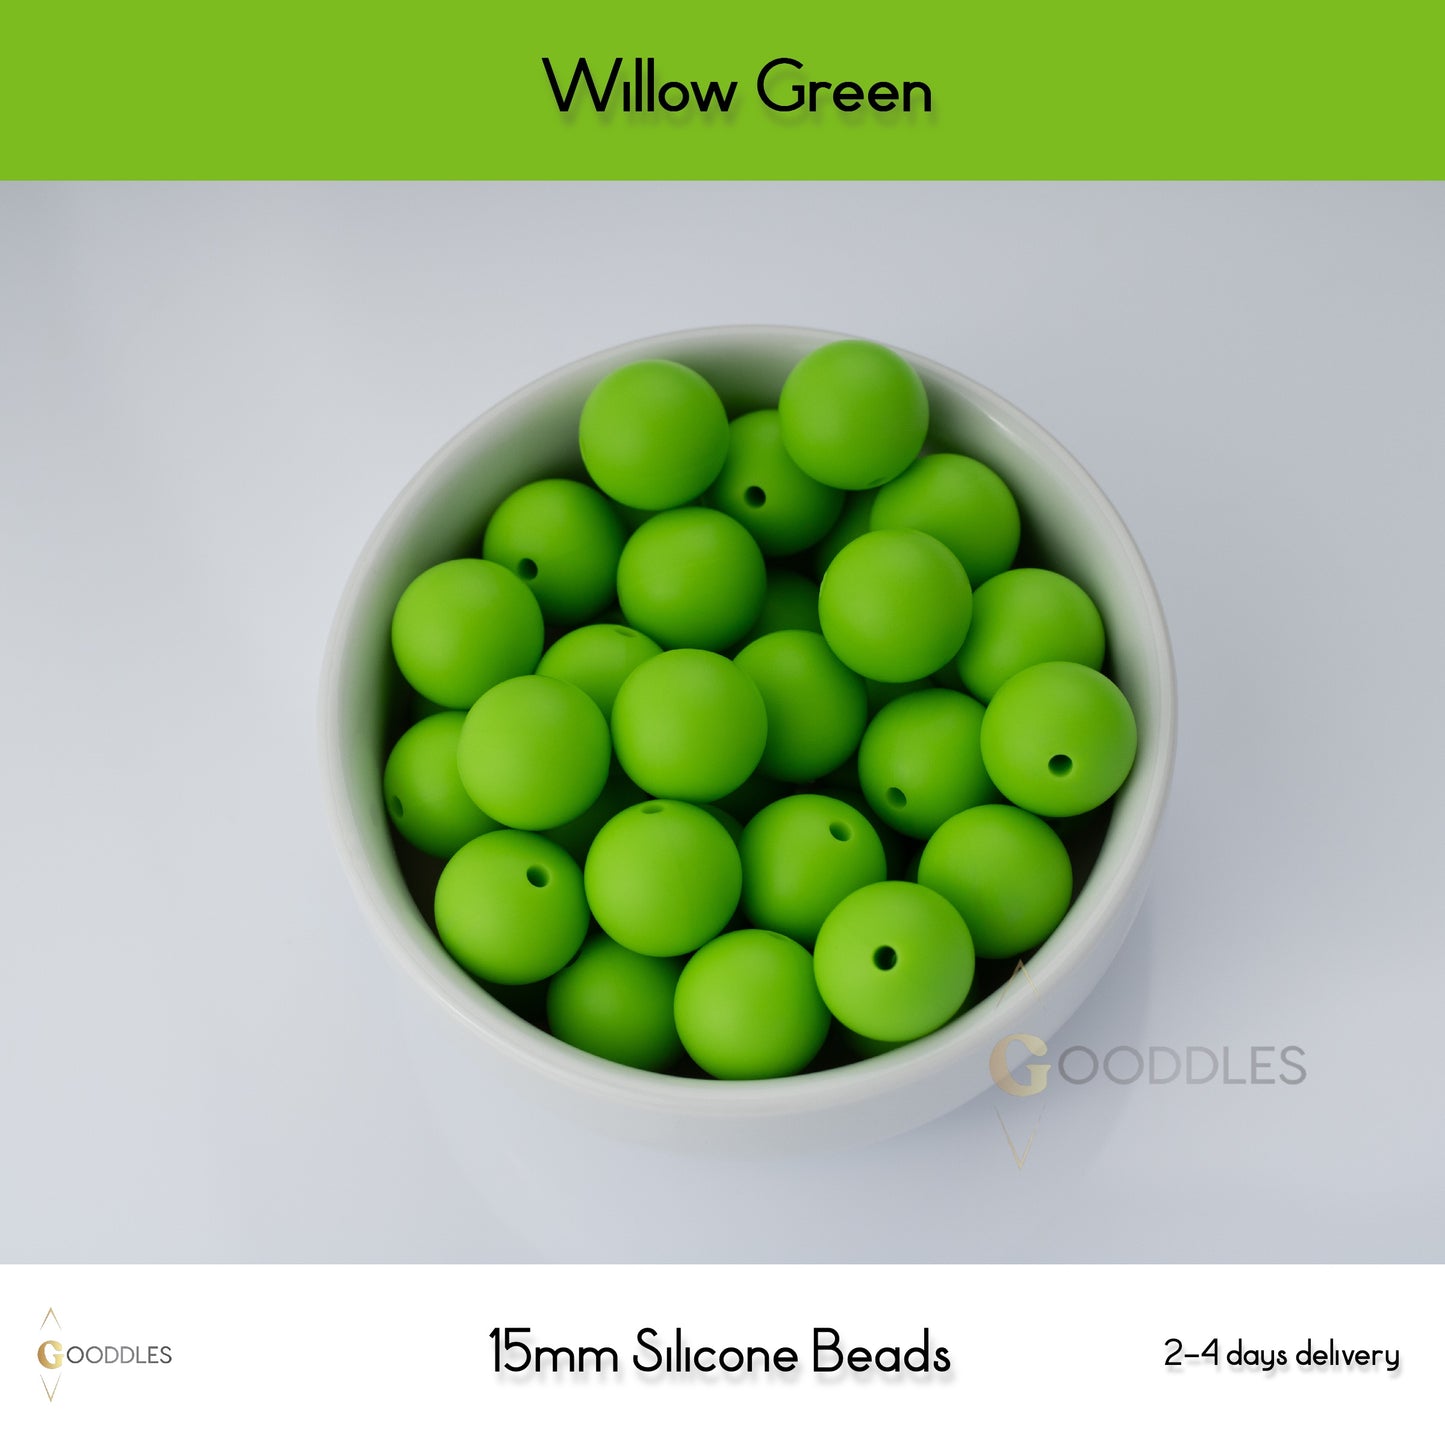 5pcs, Willow Green Silicone Beads Round Silicone Beads